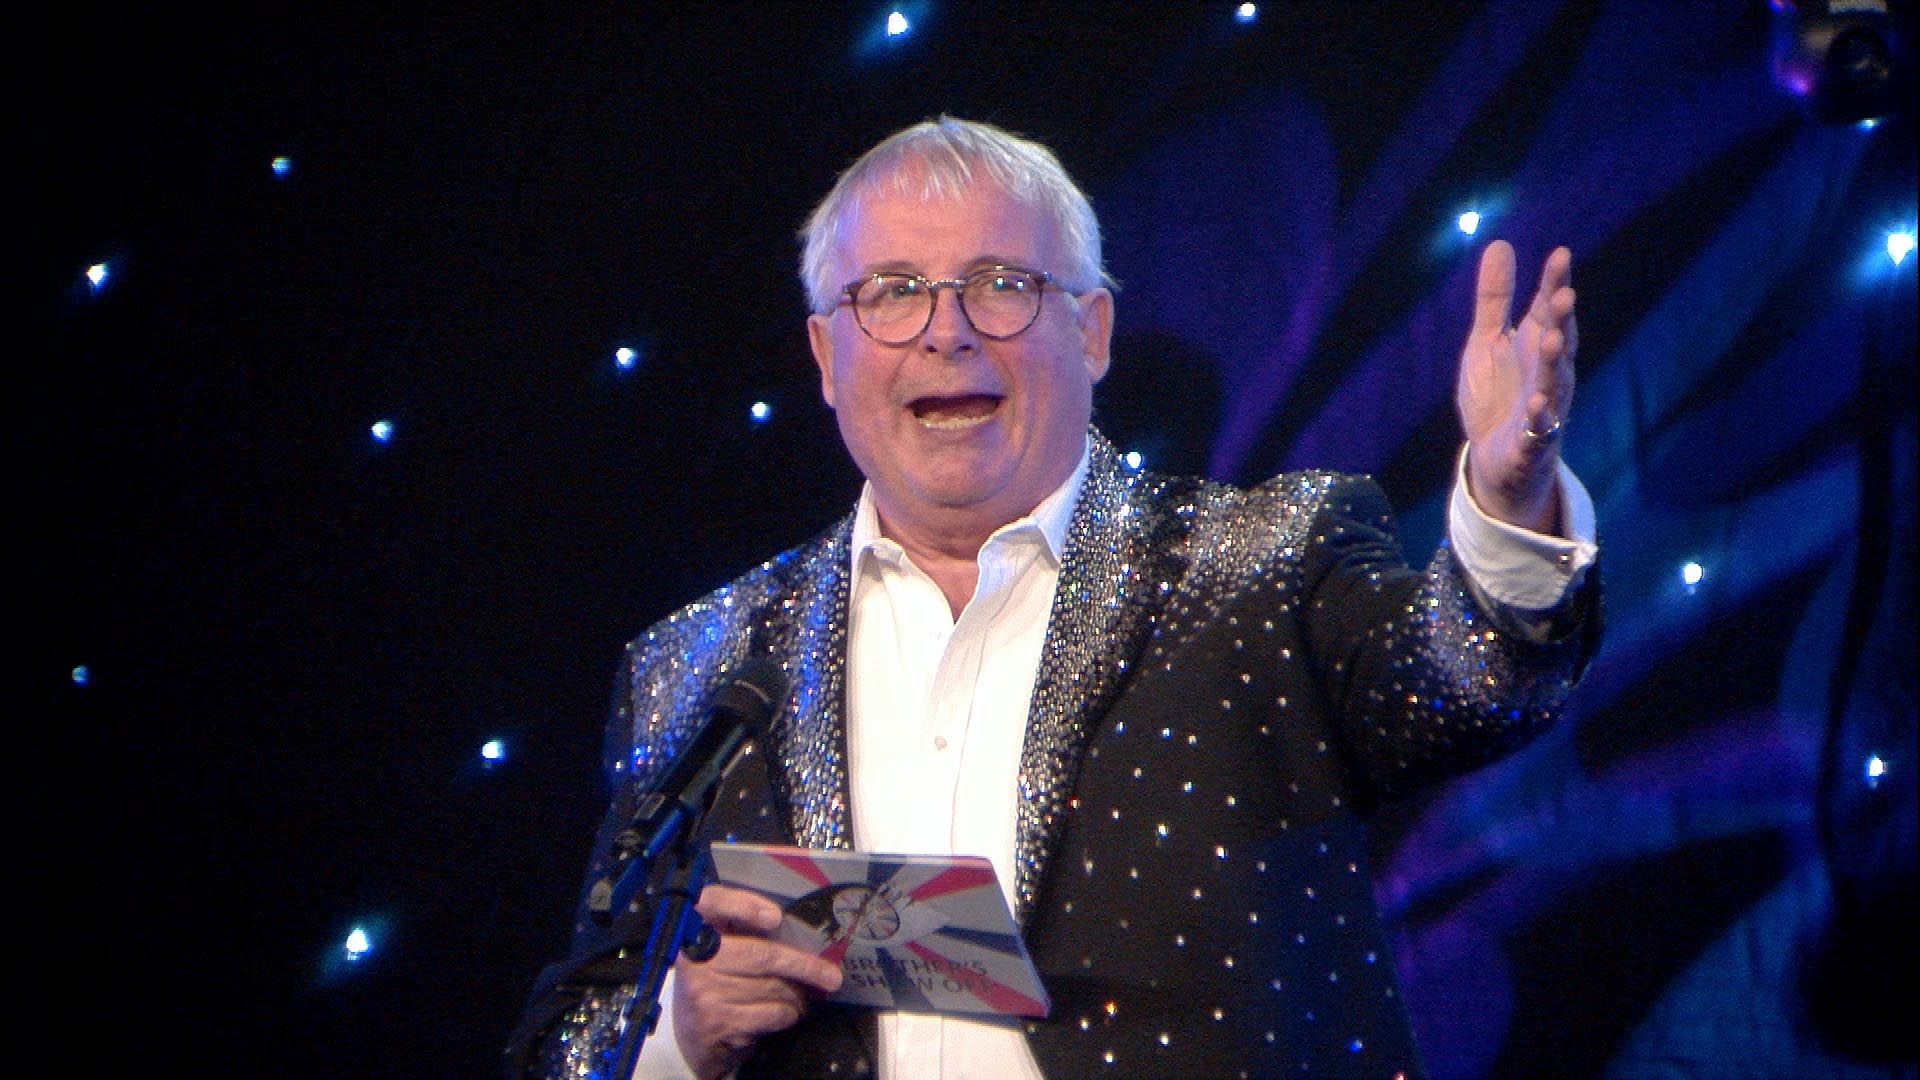 Christopher Biggins reveals what his career highlight is